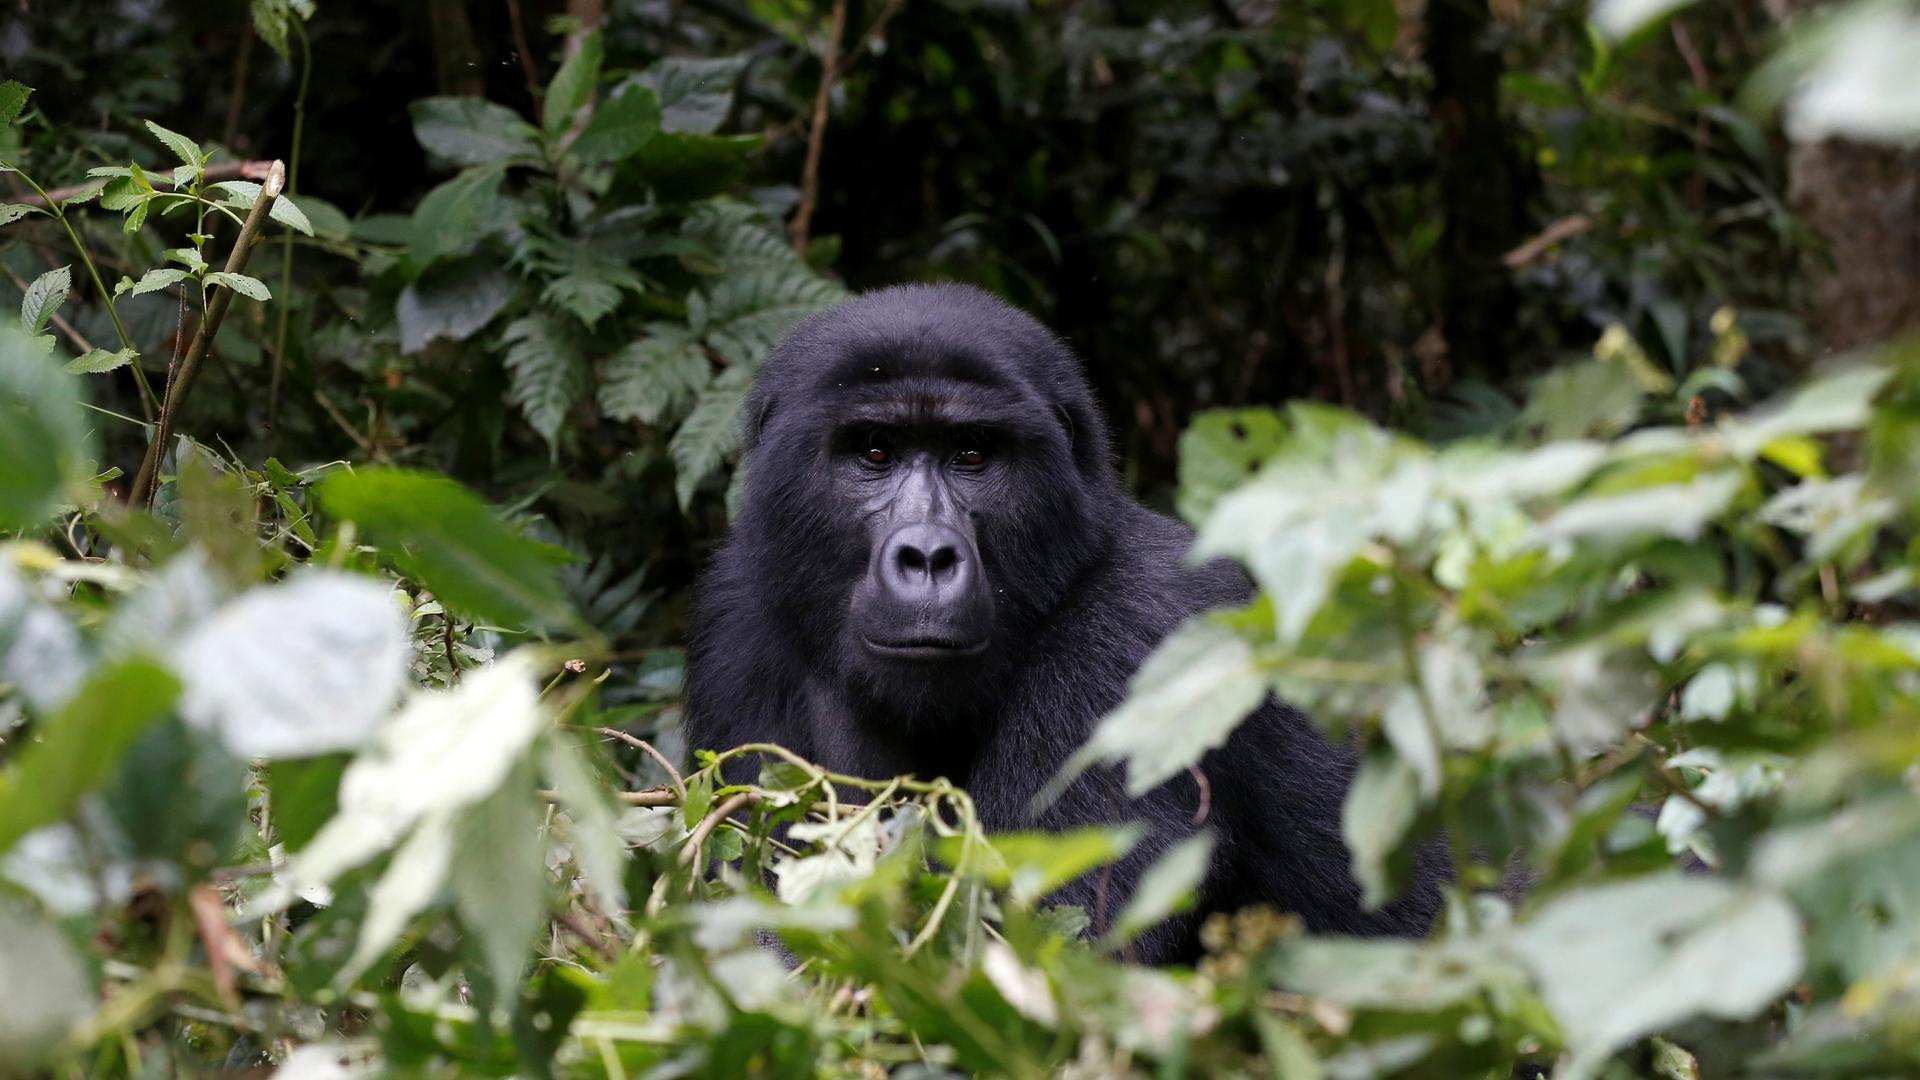 A male mountain gorilla from the Mukiza group is seen in the forest within the Bwindi National Park near the town of Kisoro, Uganda, March 31, 2018.